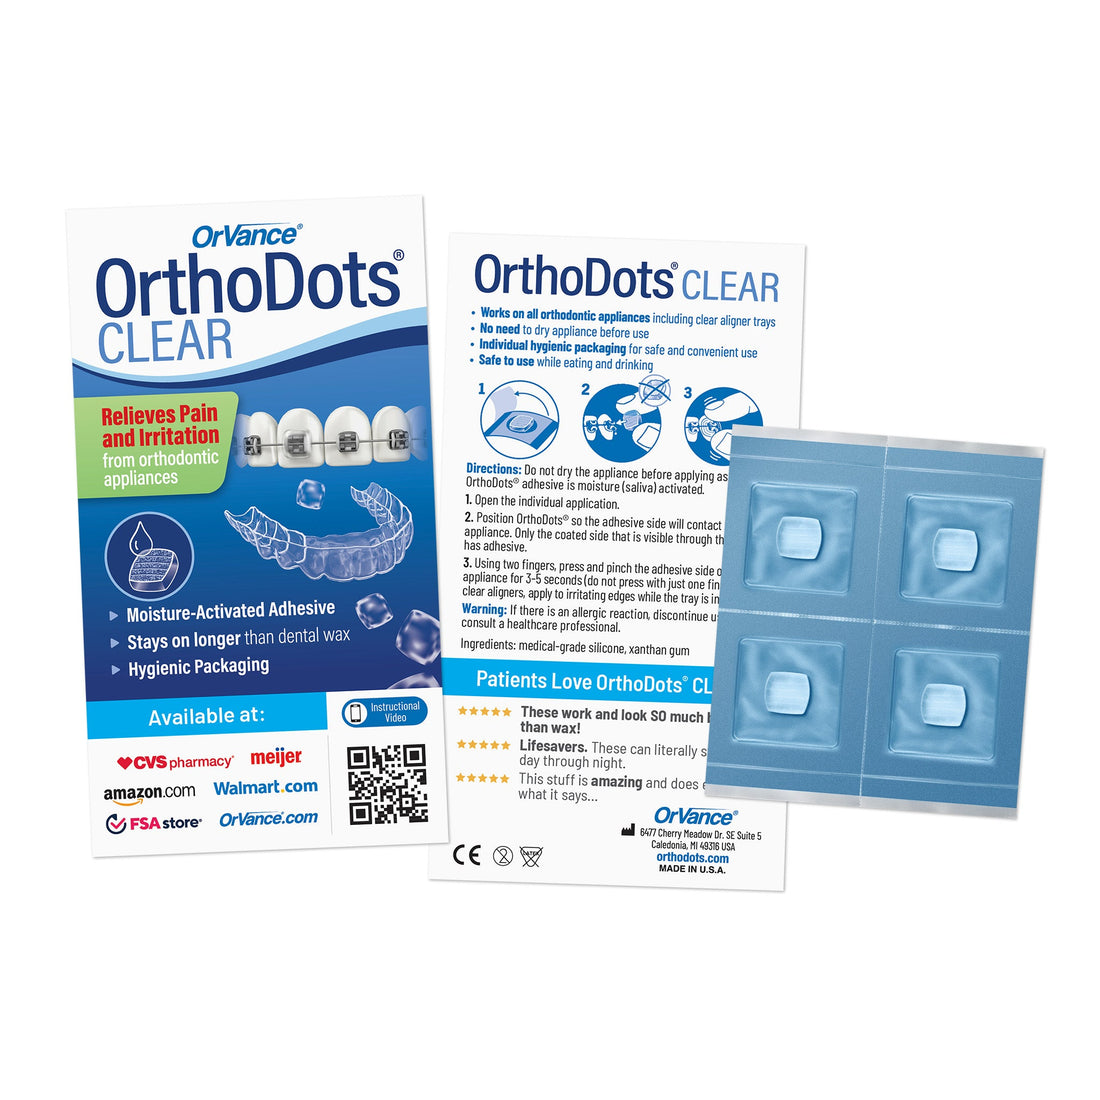 OrthoDots® CLEAR Sets New Standard For Dental Wax Quality, Safety And Compliance